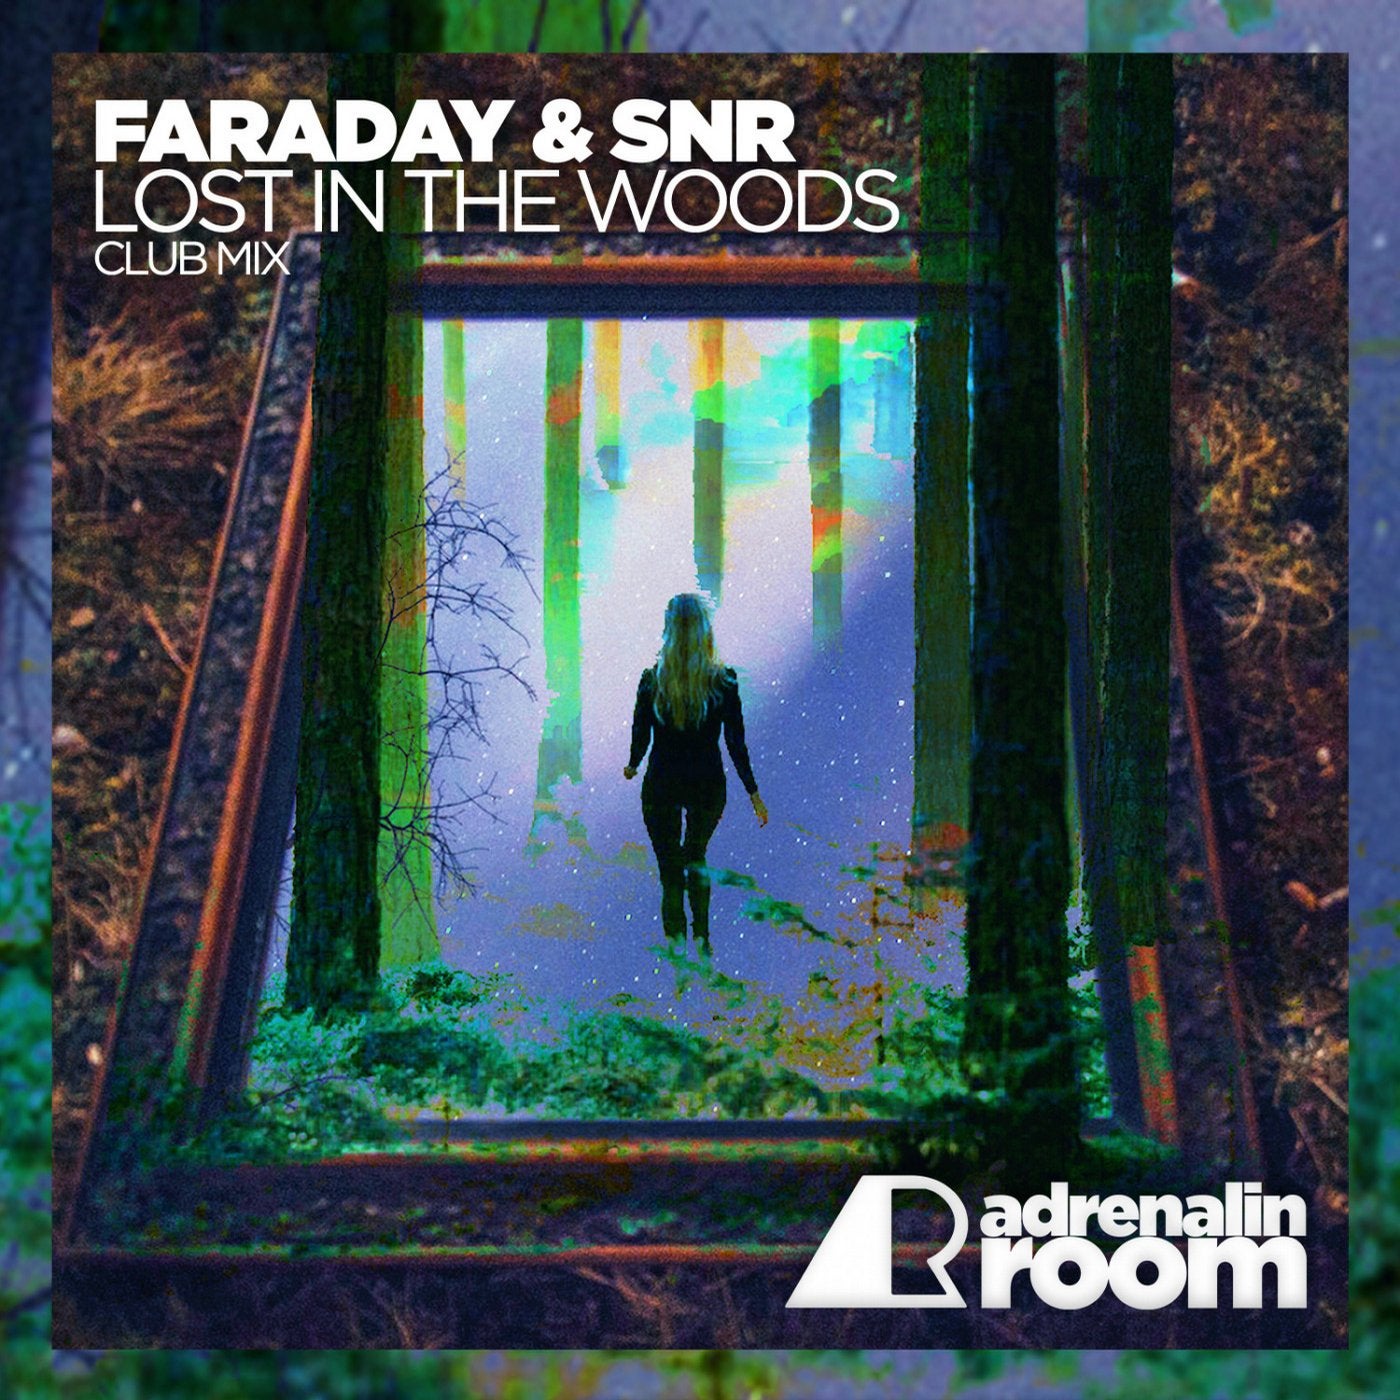 Lost in the Woods (Club Mix)